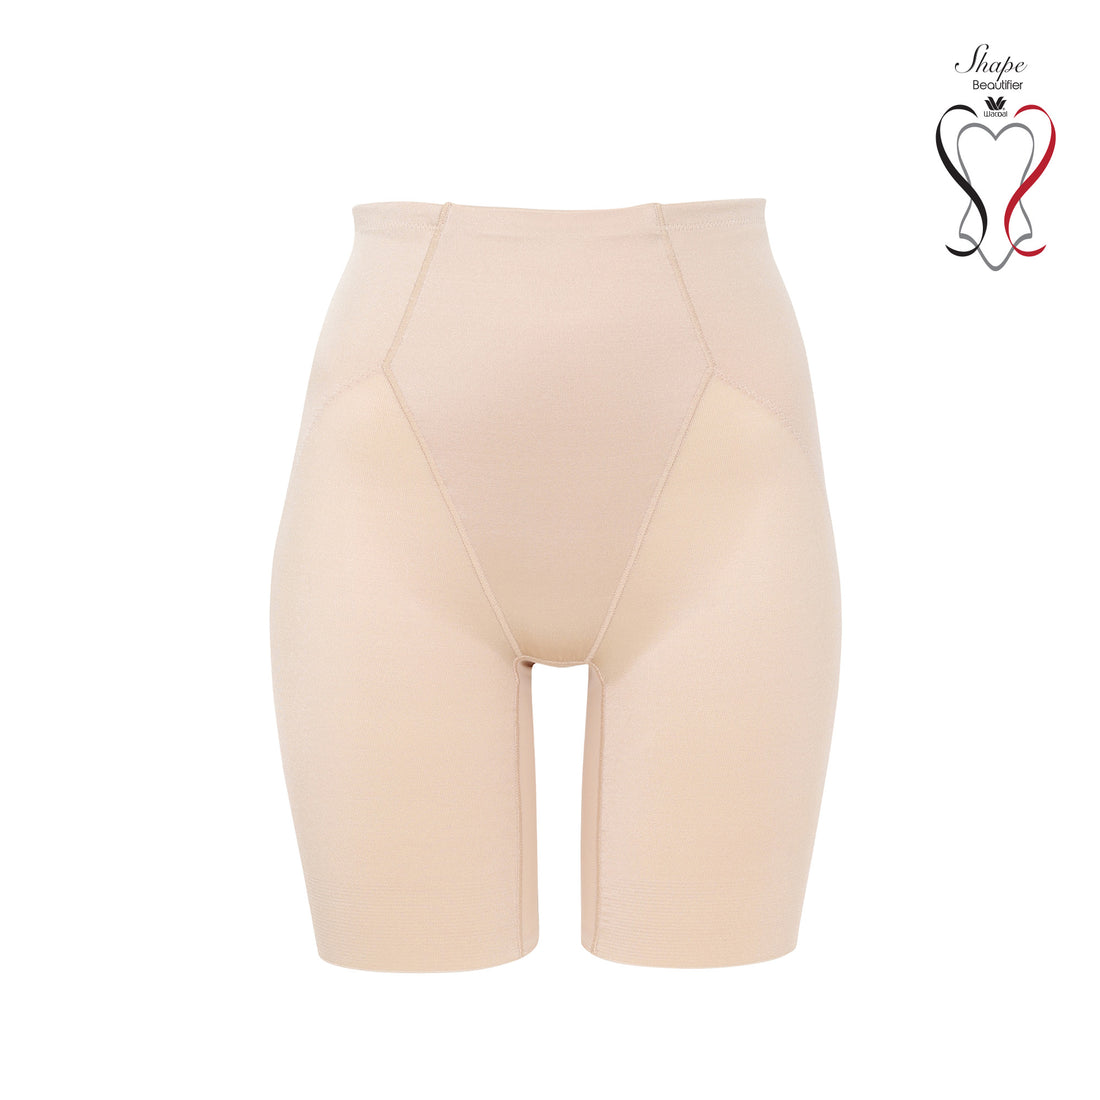 Wacoal Shapewear STAY Slimming pants for abdomen, hips and thighs, model  WG4129, beige (NN)